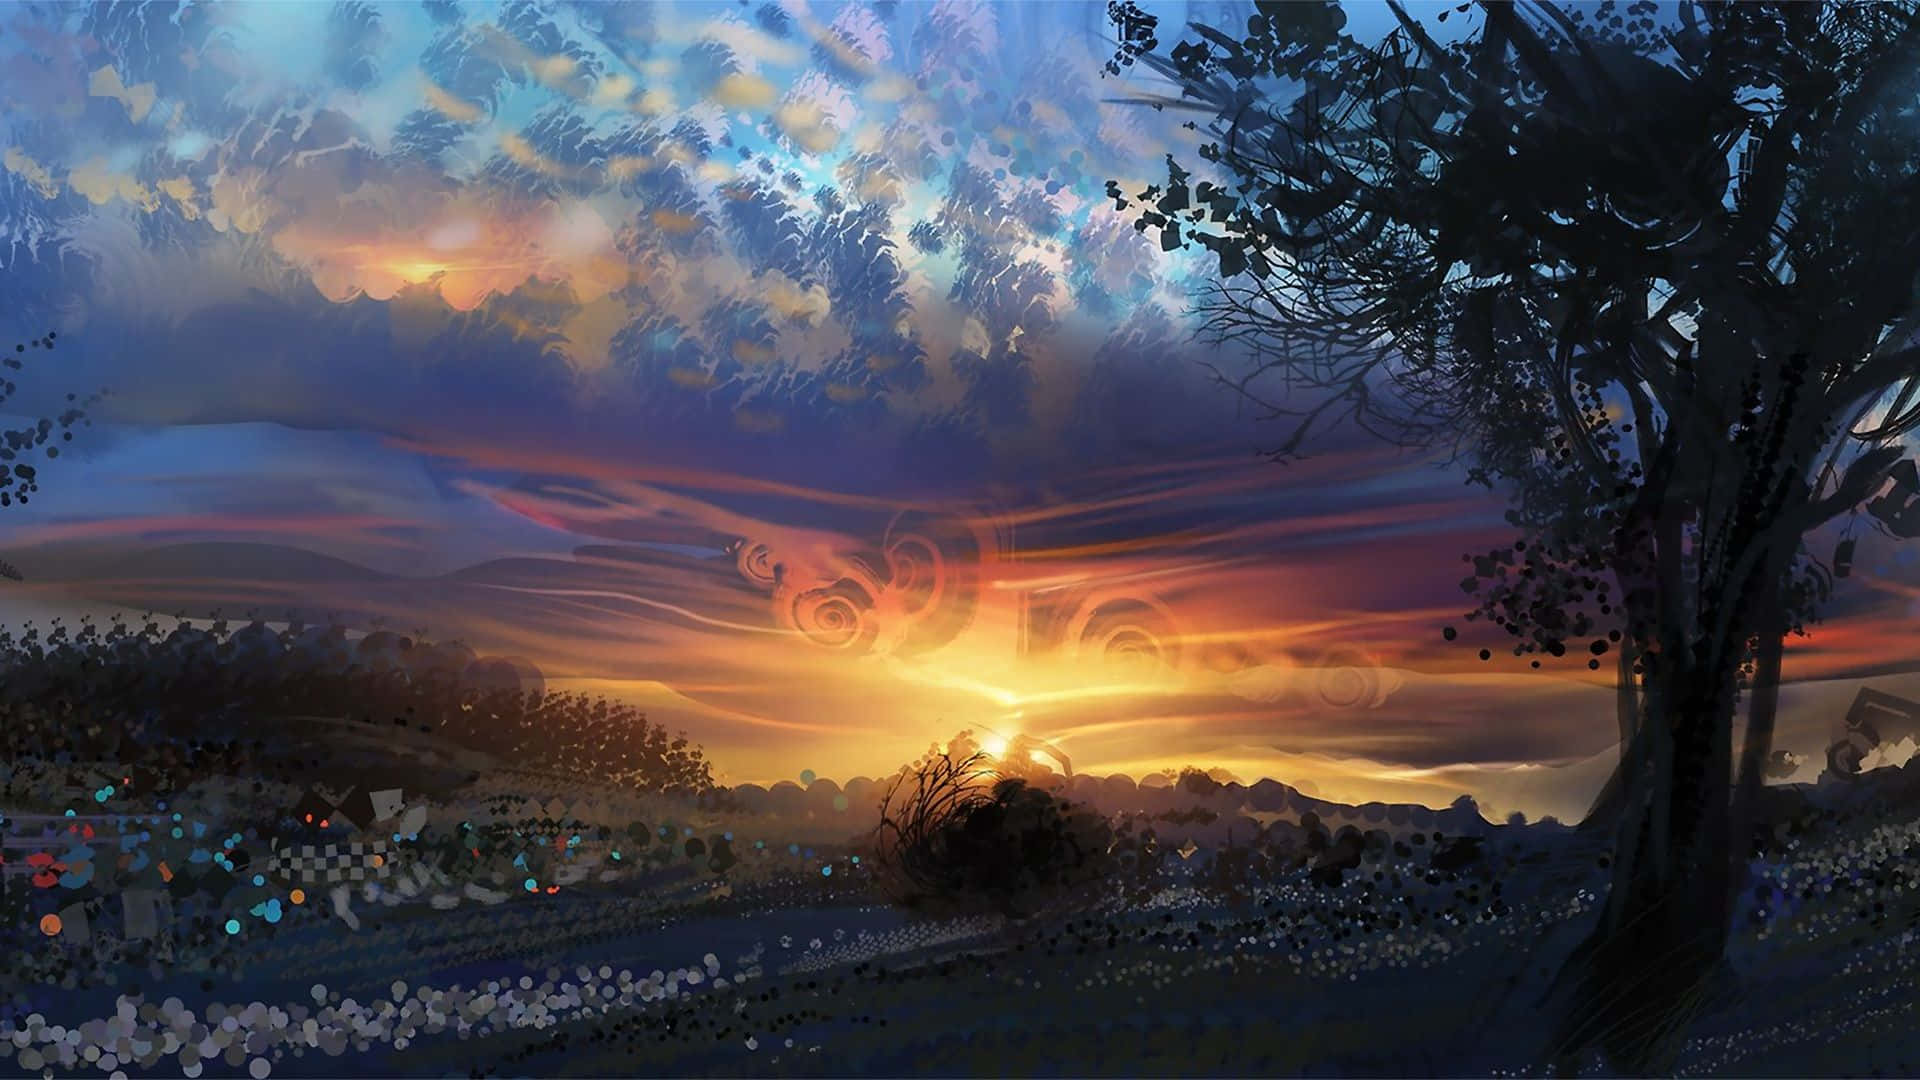 Clouds And Sunset Sky Digital Art Background